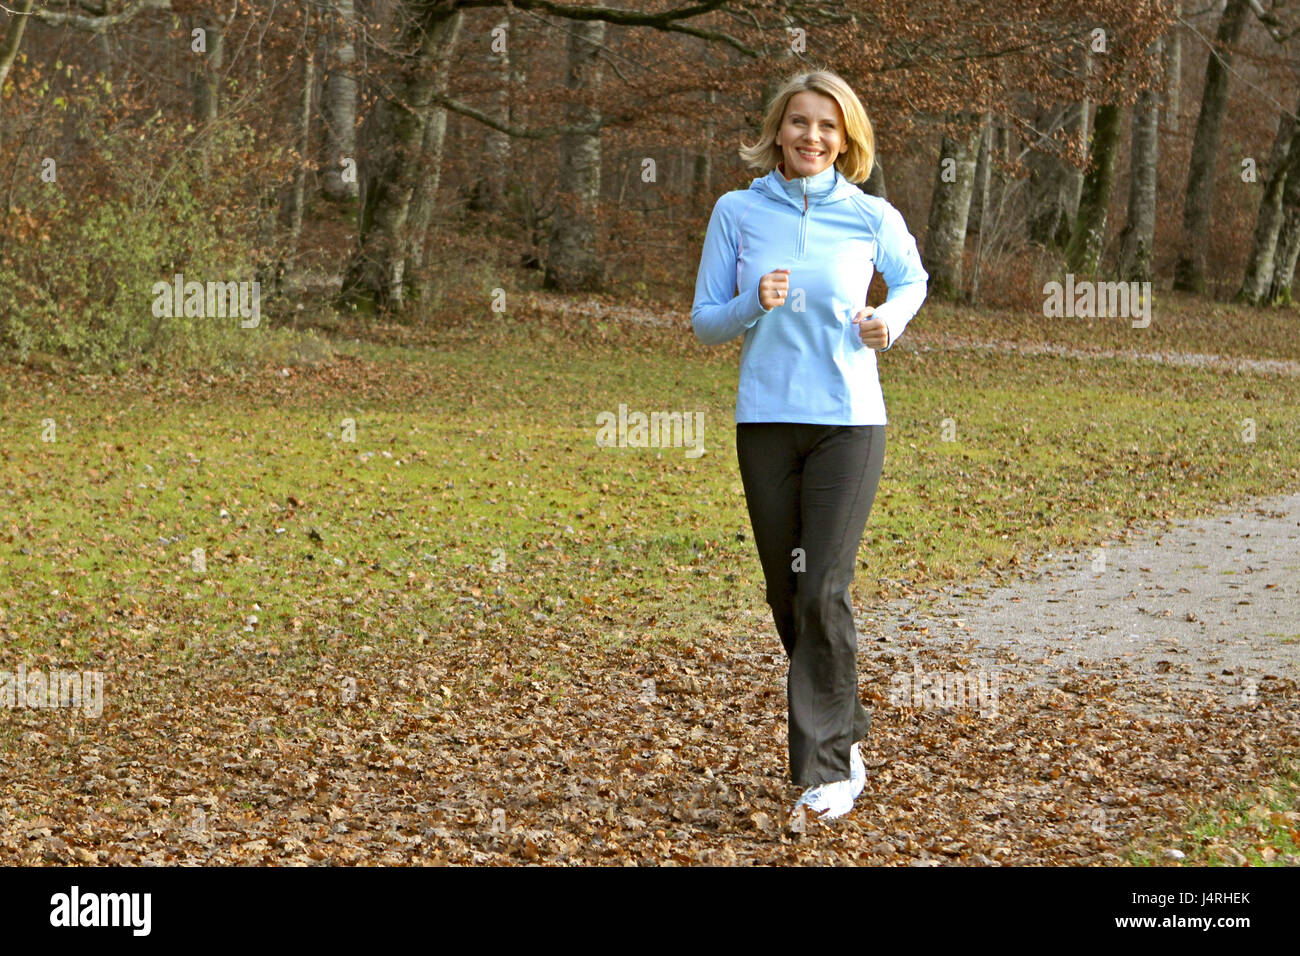 Blond woman, with the jogging in an autumn wood, model released, Stock Photo